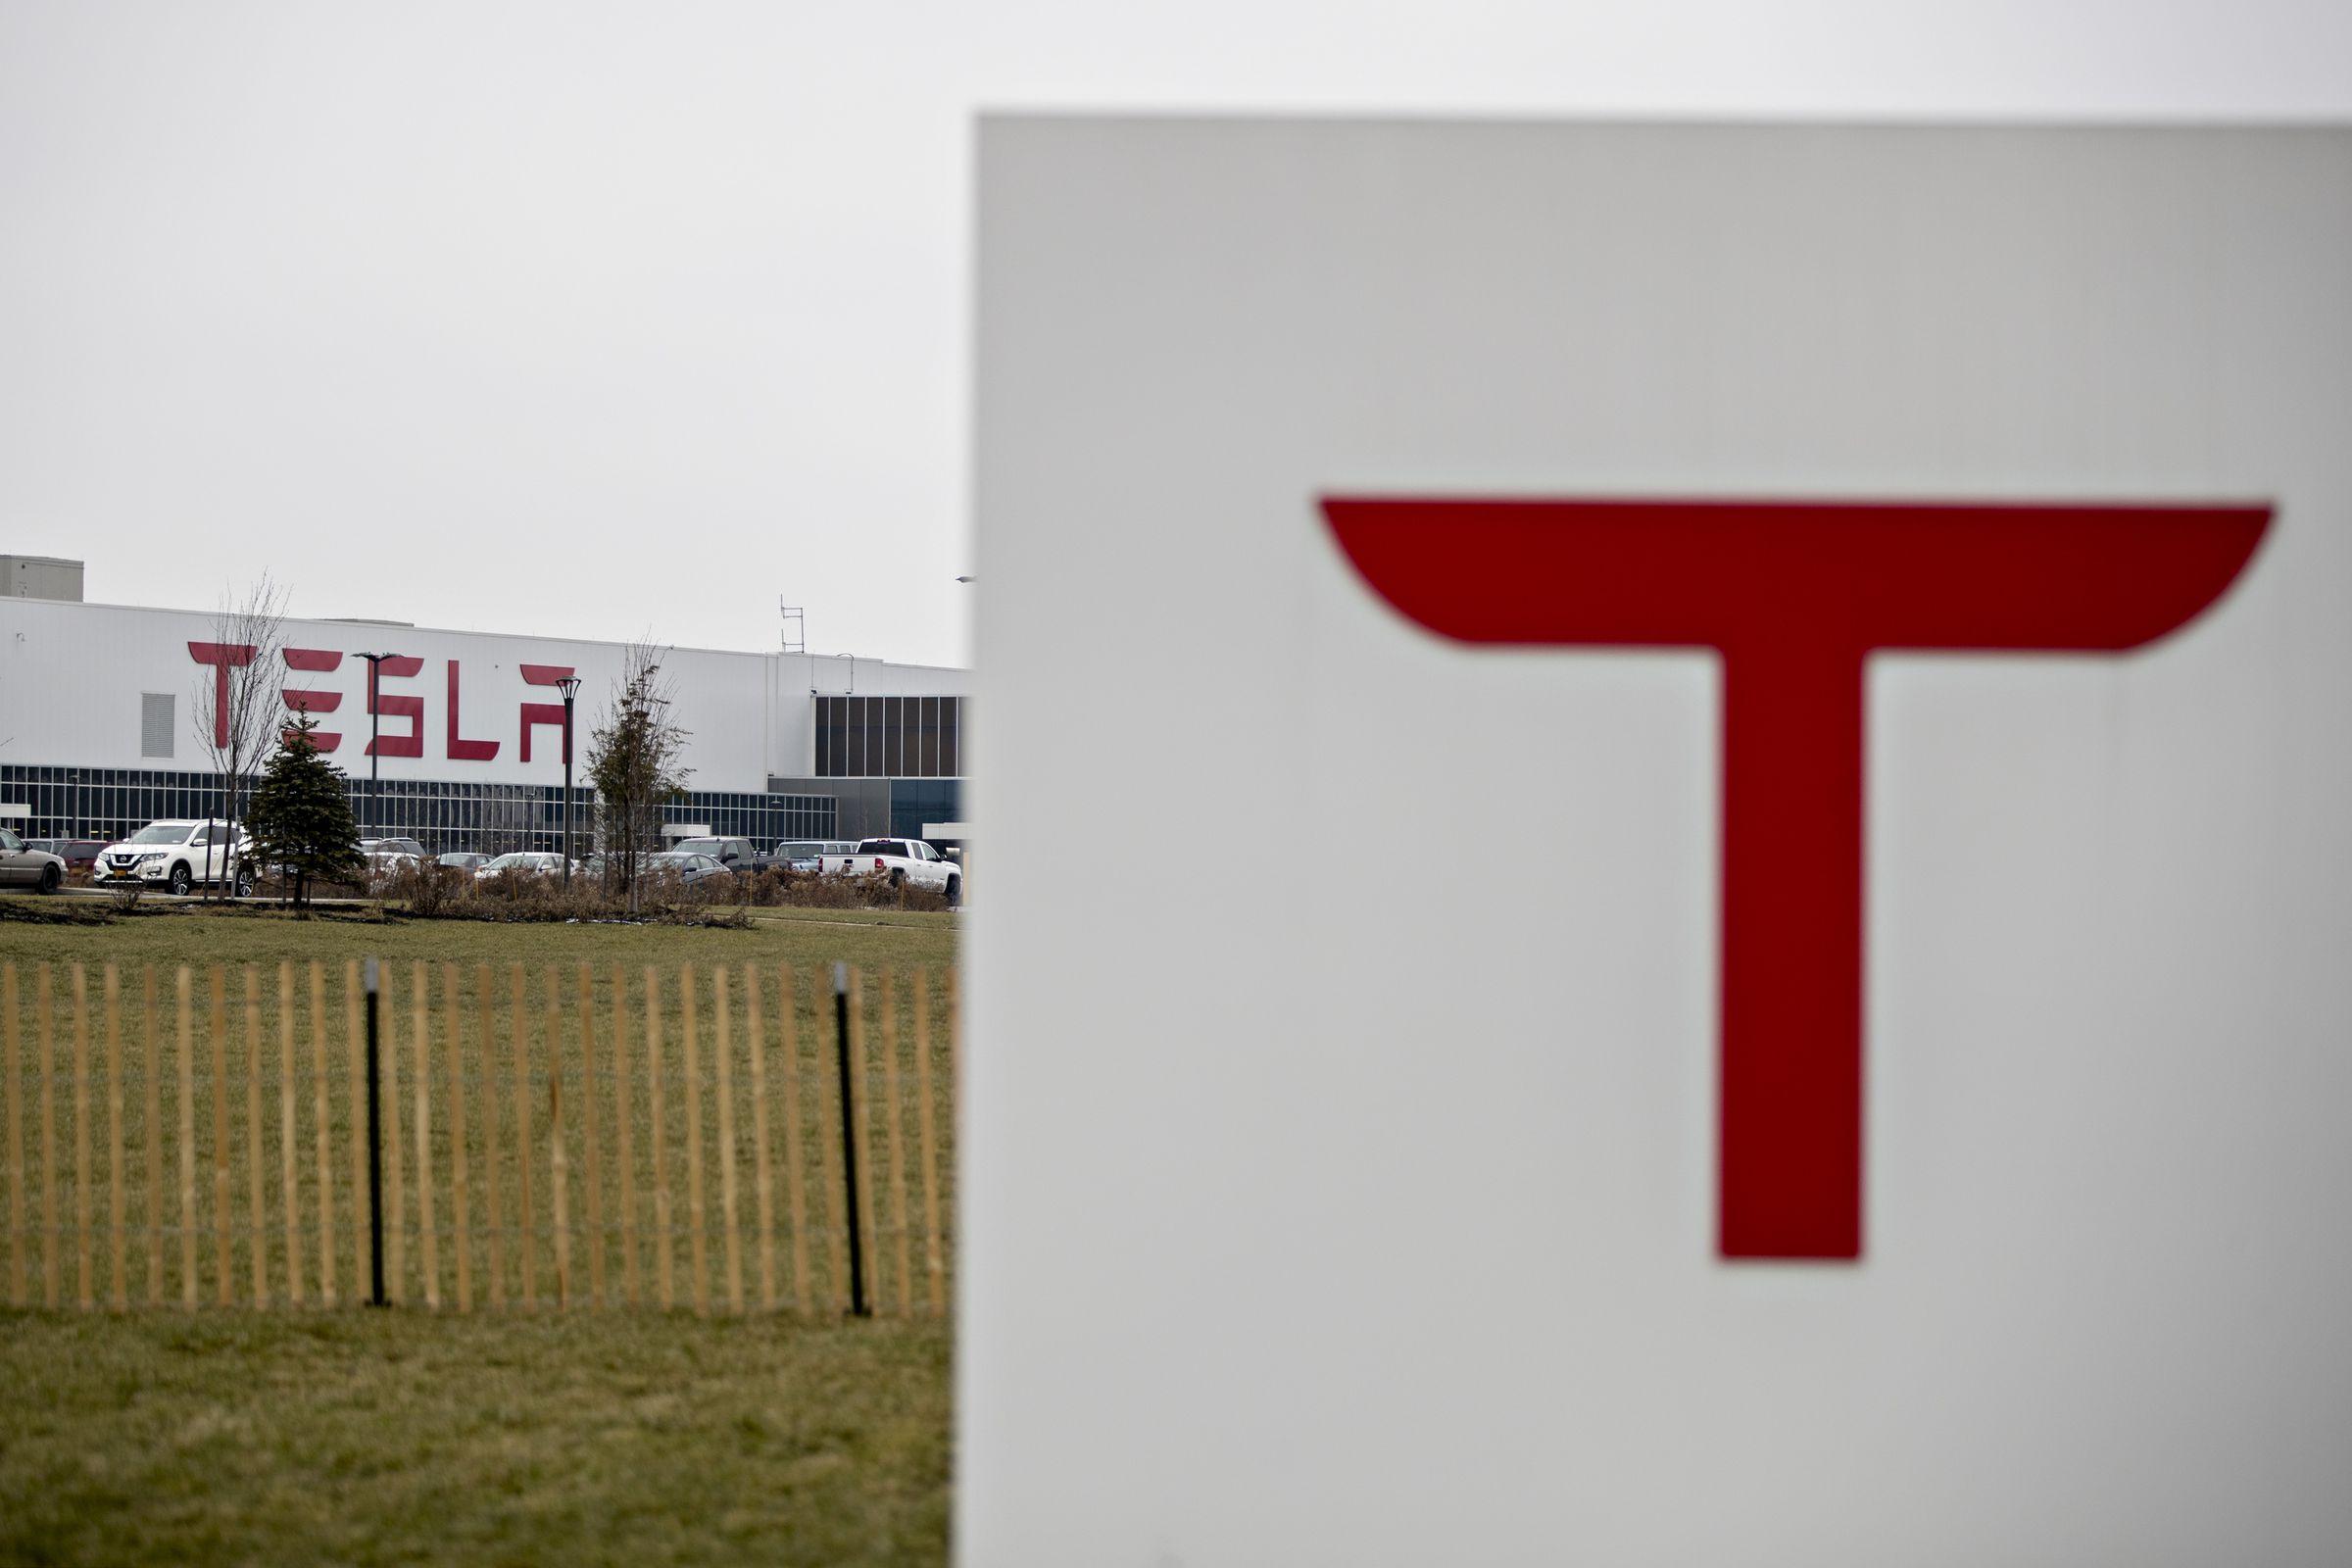 Tesla Inc.’s Solar Panel Factory As Workers Try To Unionize